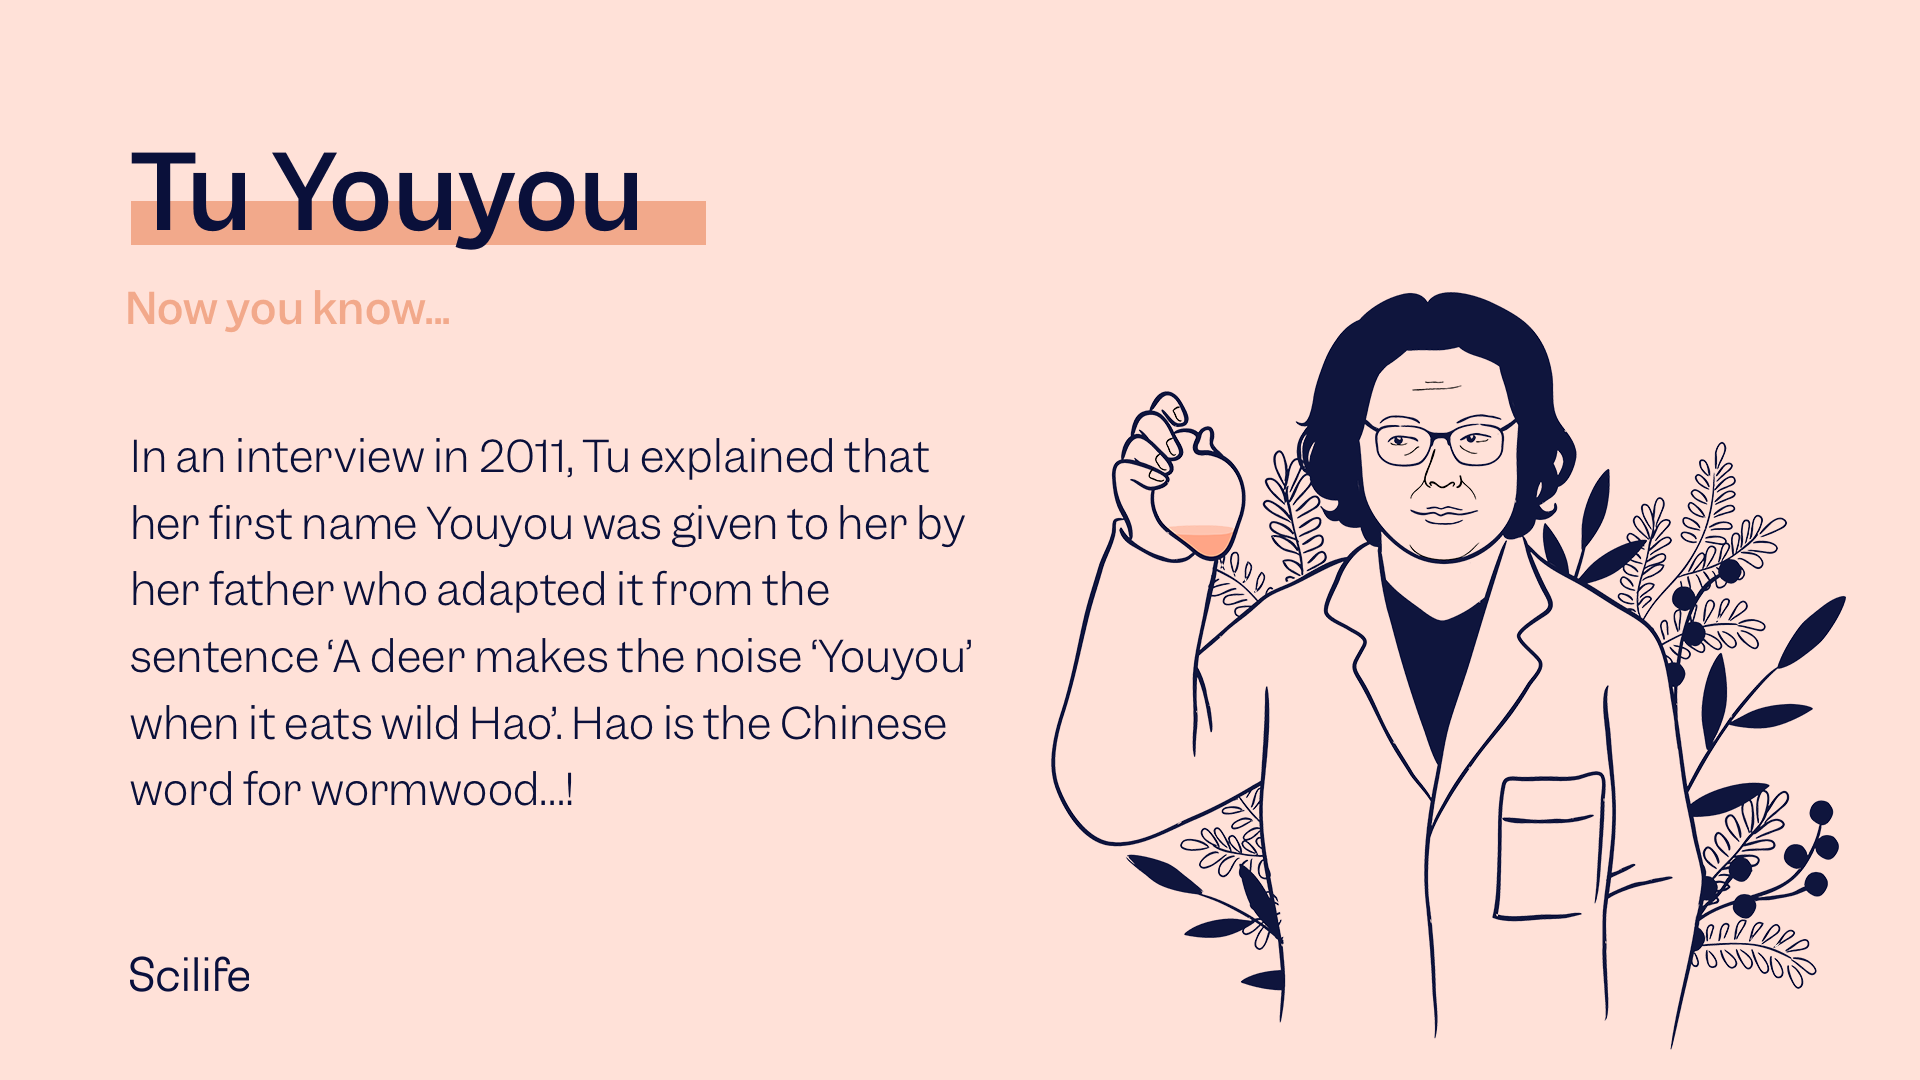 Illustration of Tu Youyou with the text: In an interview in 2011, Tu explained that her first name Youyou was given to her by her father who adapted it from the sentence ‘A deer makes the noise ‘Youyou’ when it eats wild Hao’. Hao is the Chinese word for wormwood…!